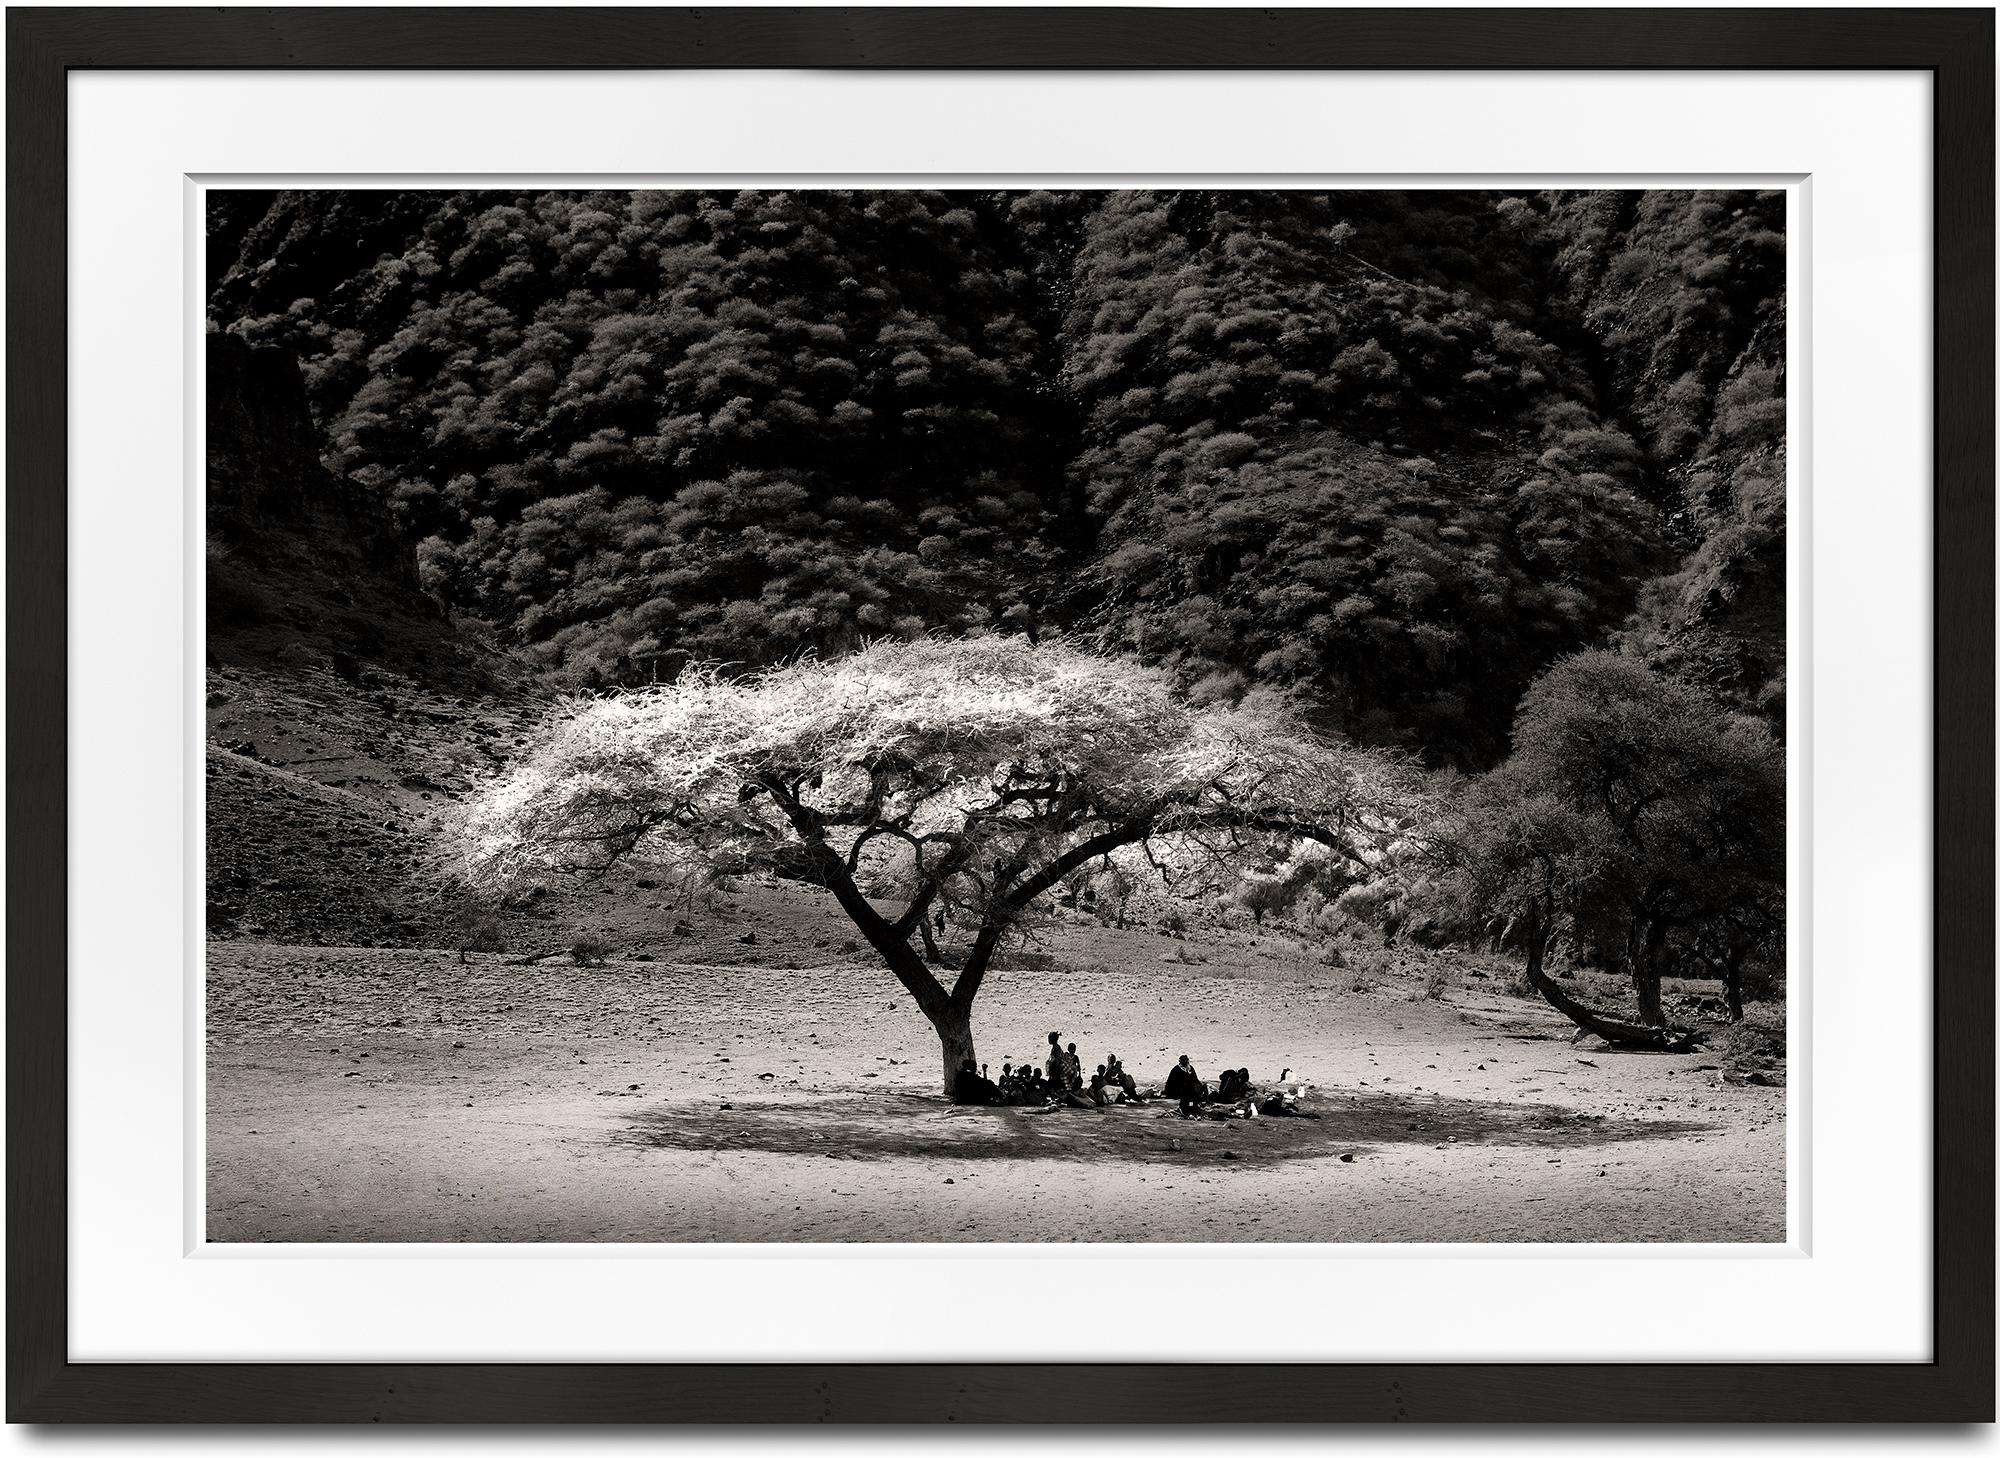 Midday in Rift Valley, Africa, people, black and white photography, family - Photograph by Joachim Schmeisser